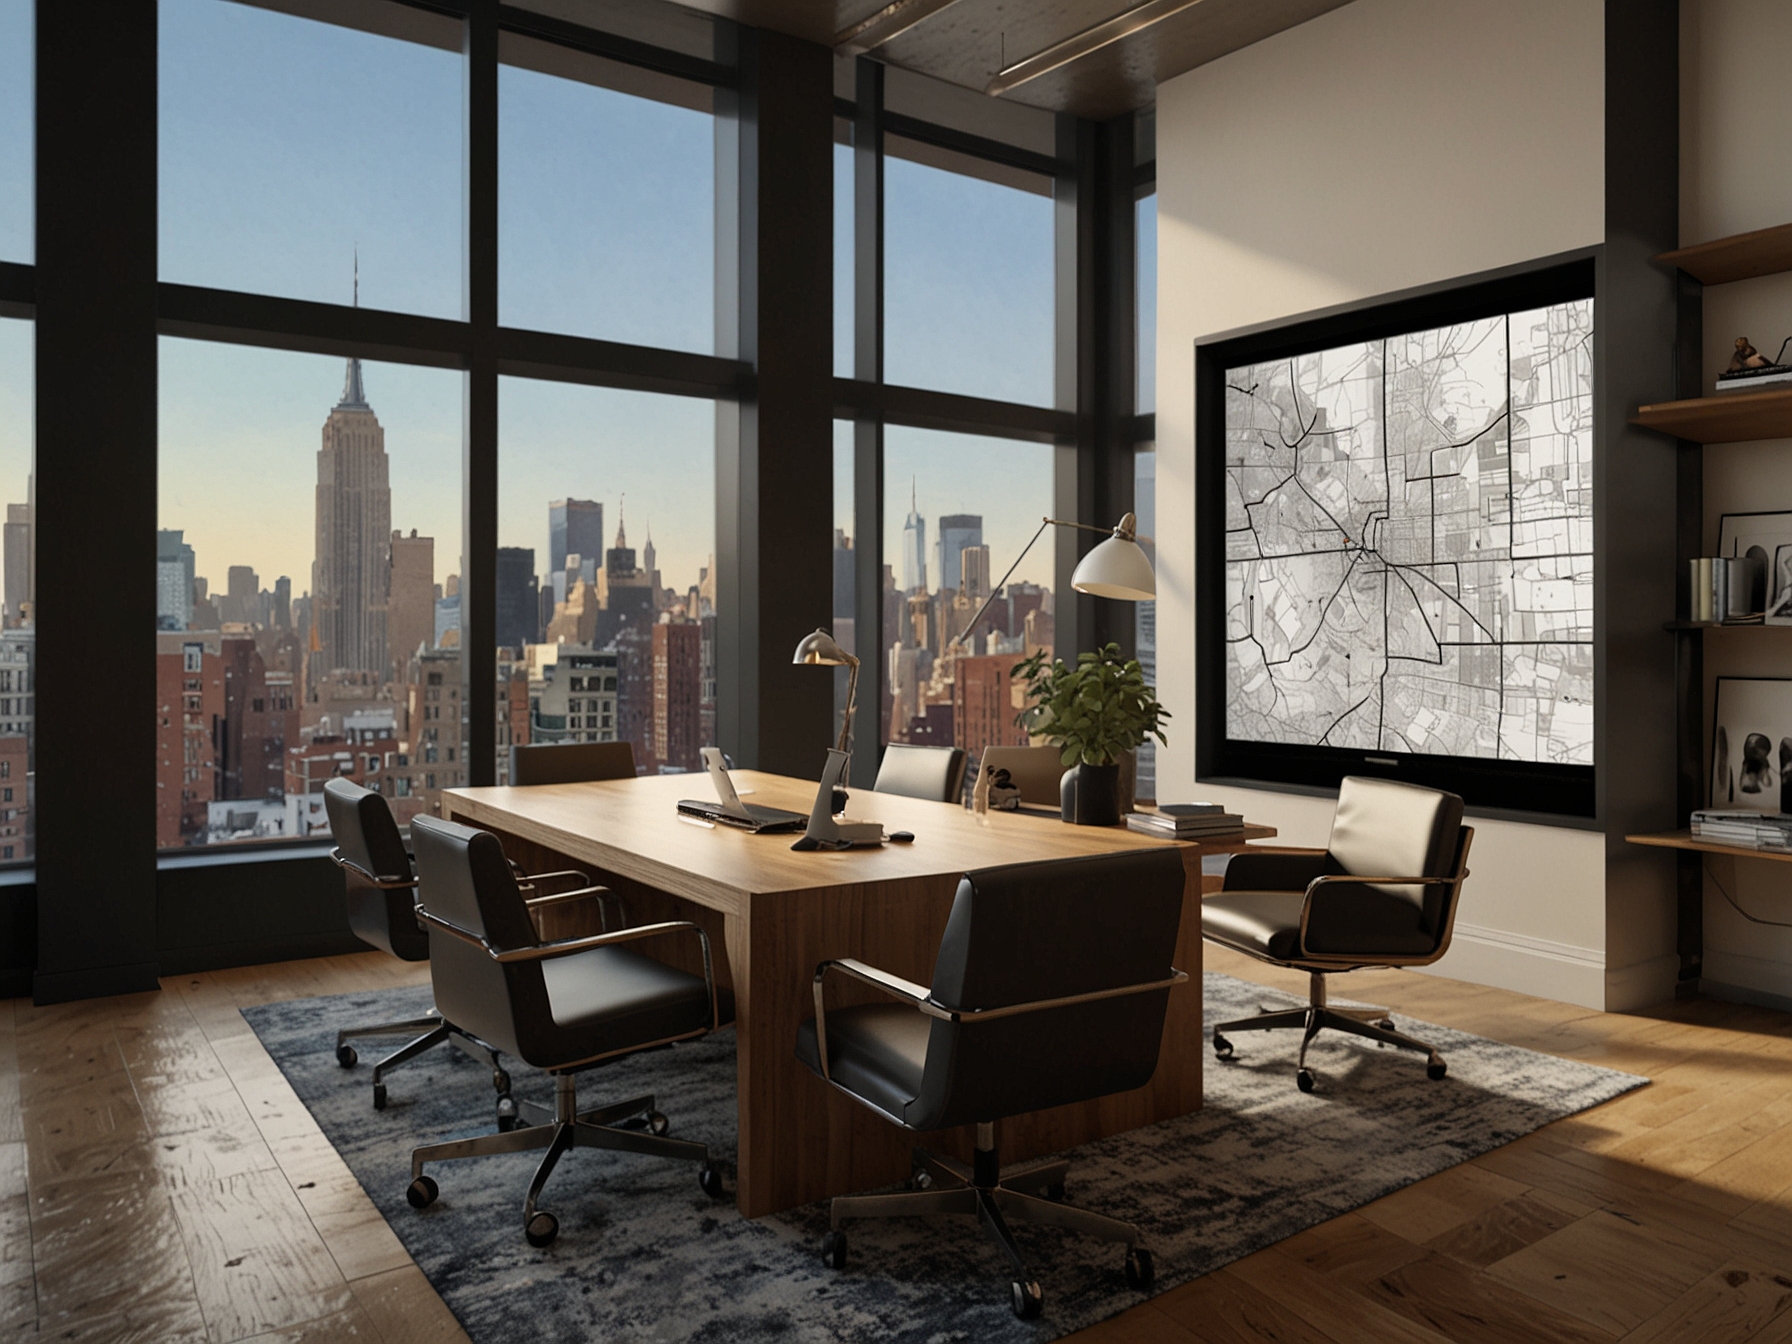 Chloe Tucker Caine hosting a virtual tour from the Serhant SOHO office, showcasing her innovative use of technology to enhance property visibility in New York City's real estate market.